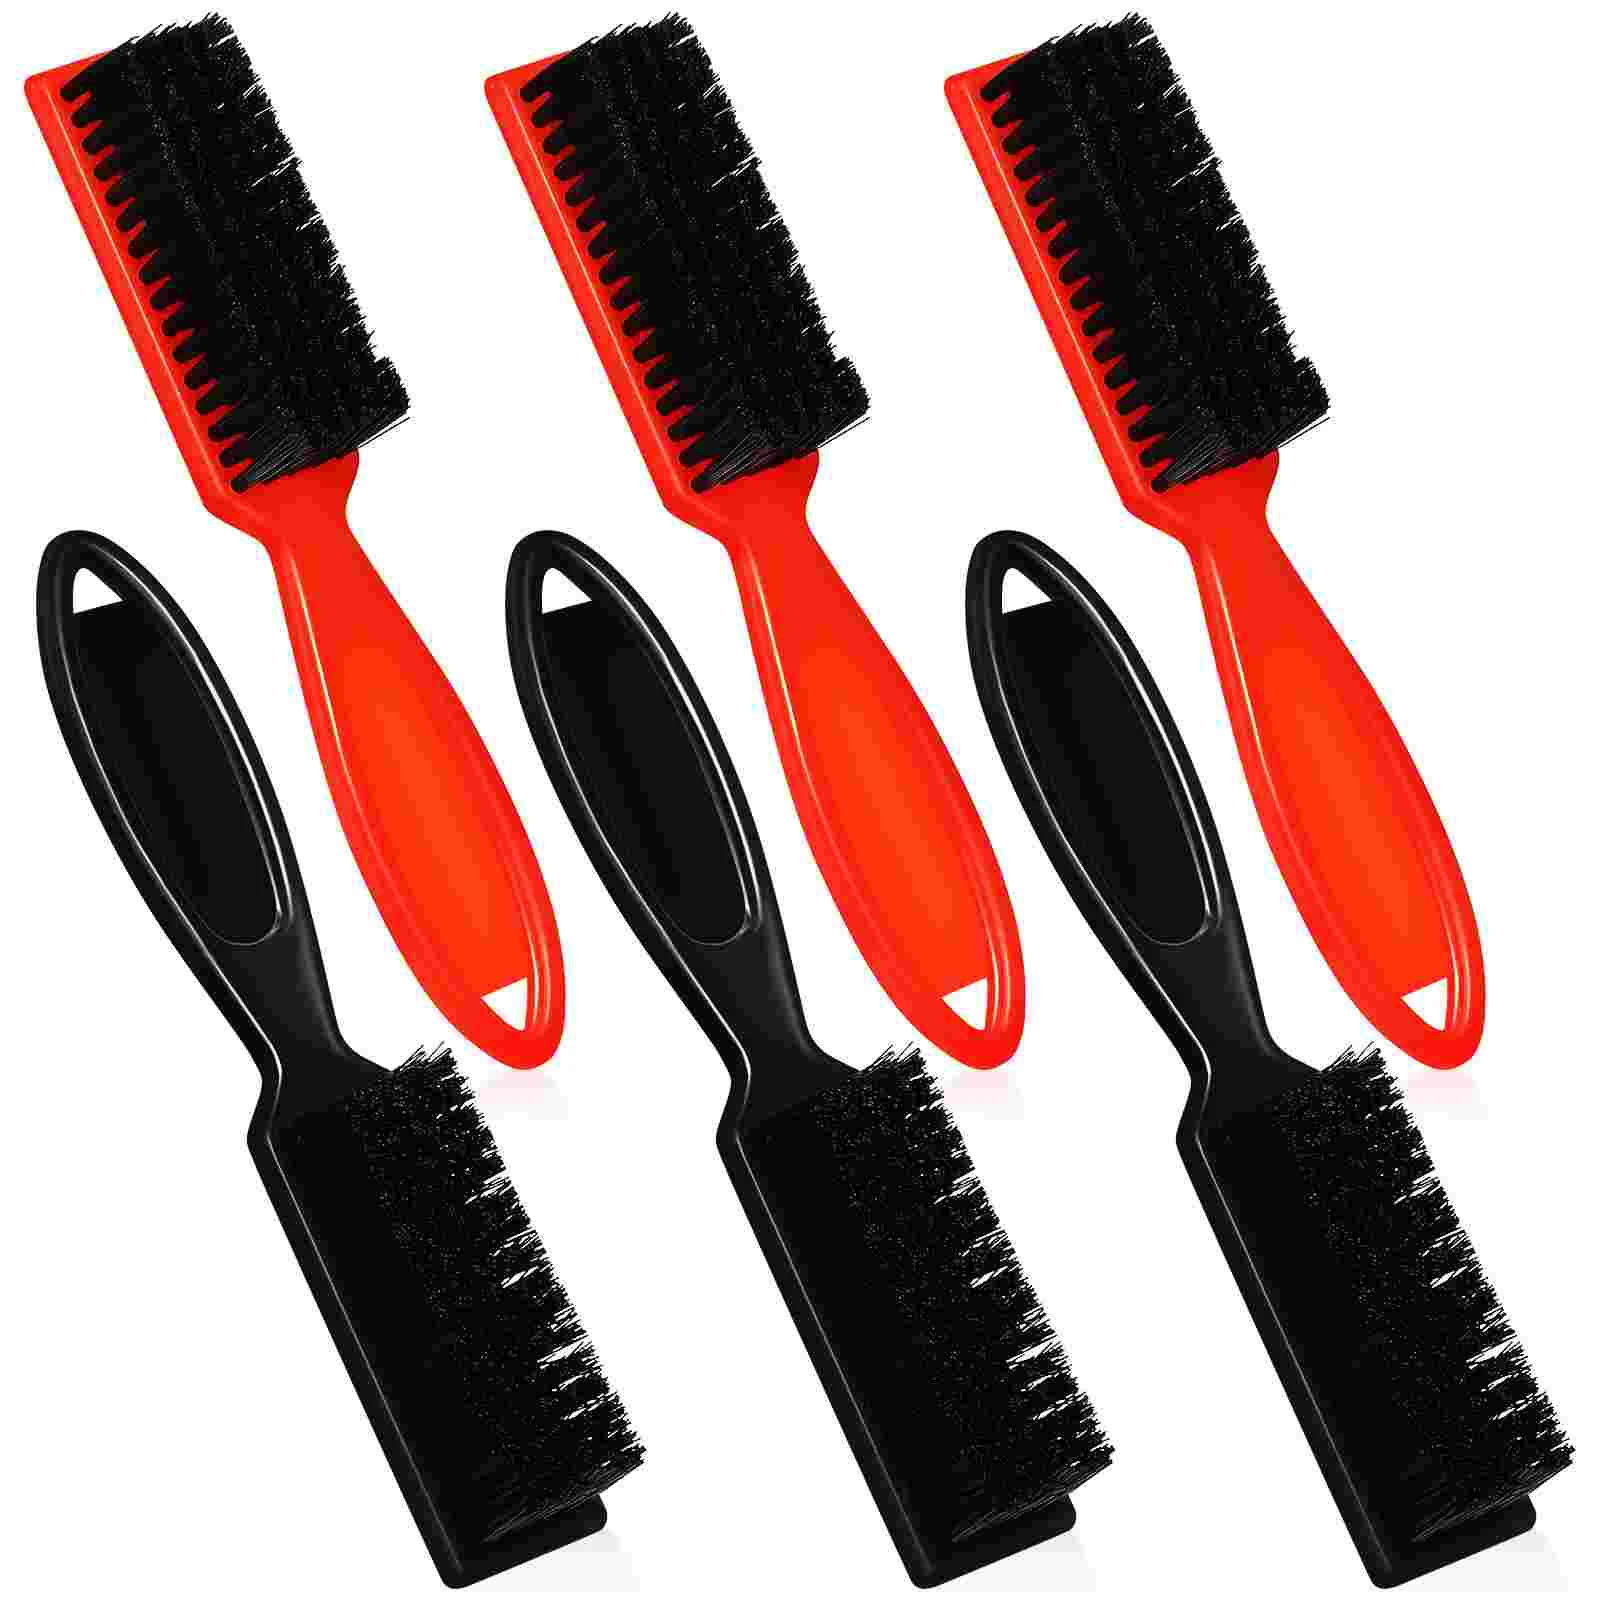 

Barber Brushes Brush Hair Clipper Cleaning Nylon Trimmerclean Cleaner Styling Accessories Tools Supplies Handletool Neck Duster